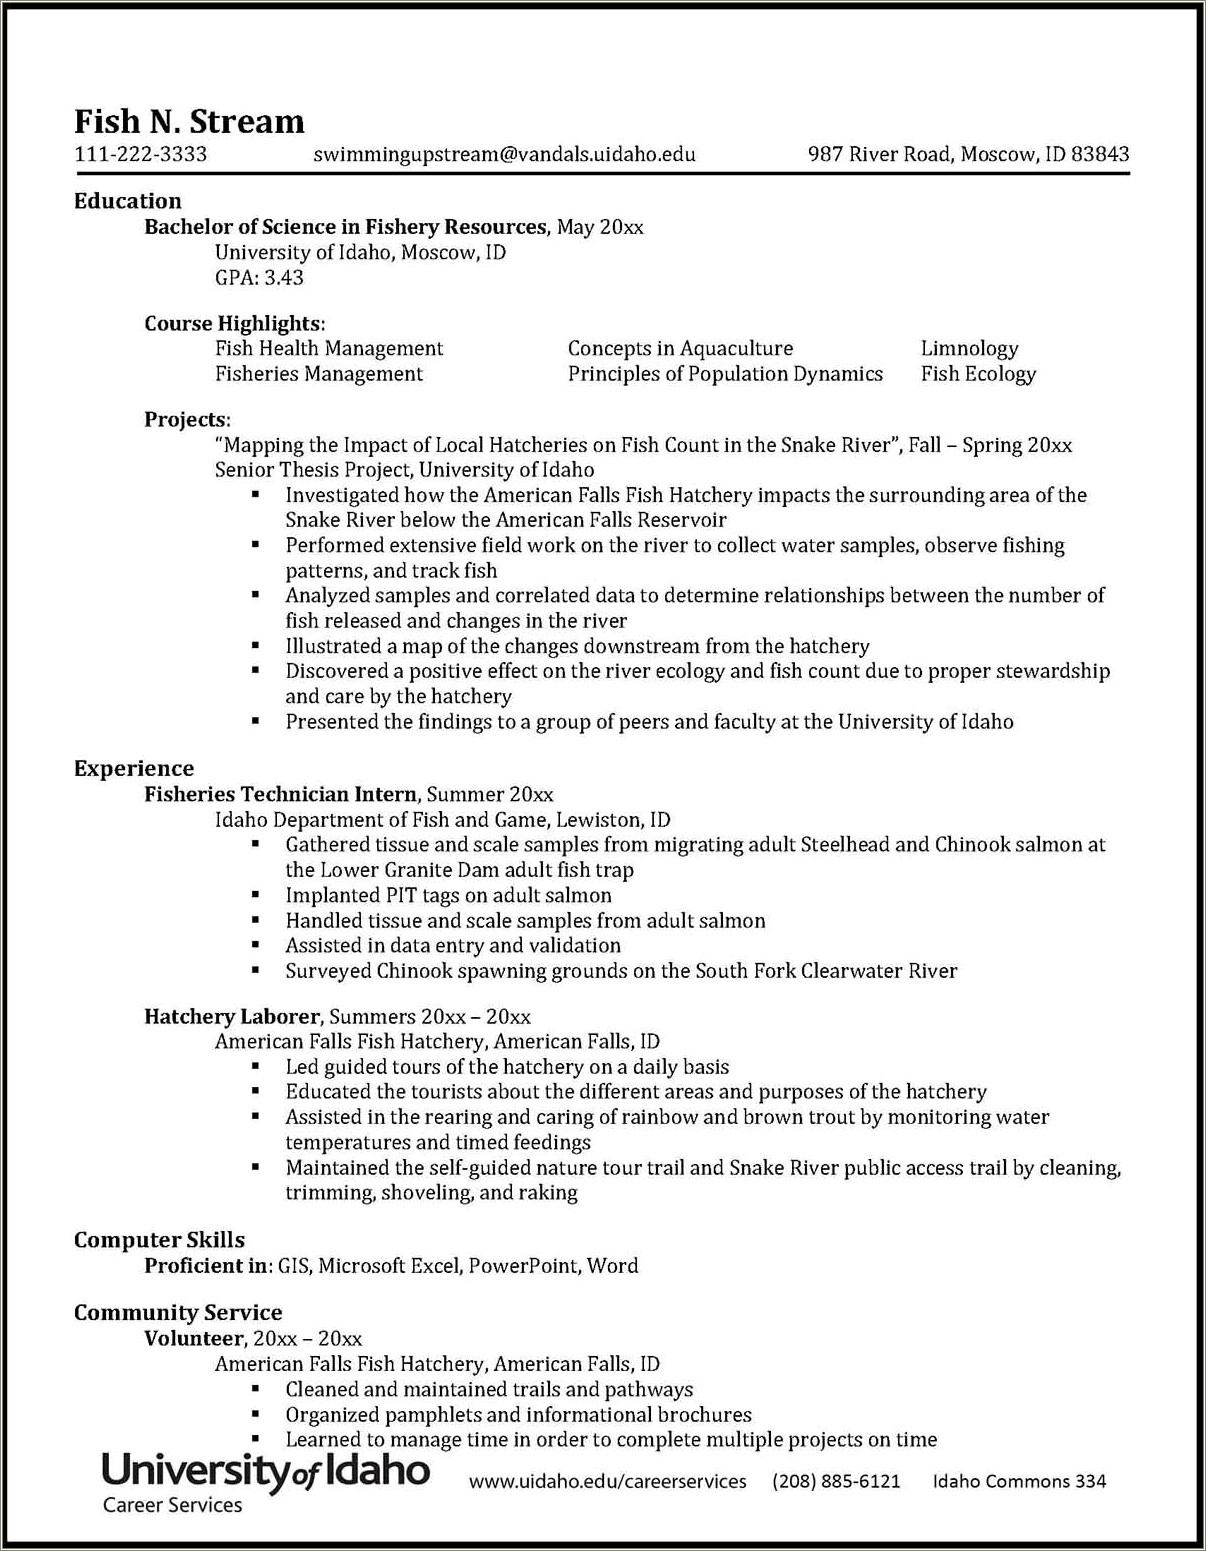 Examples Of Great Natural Resource Resumes